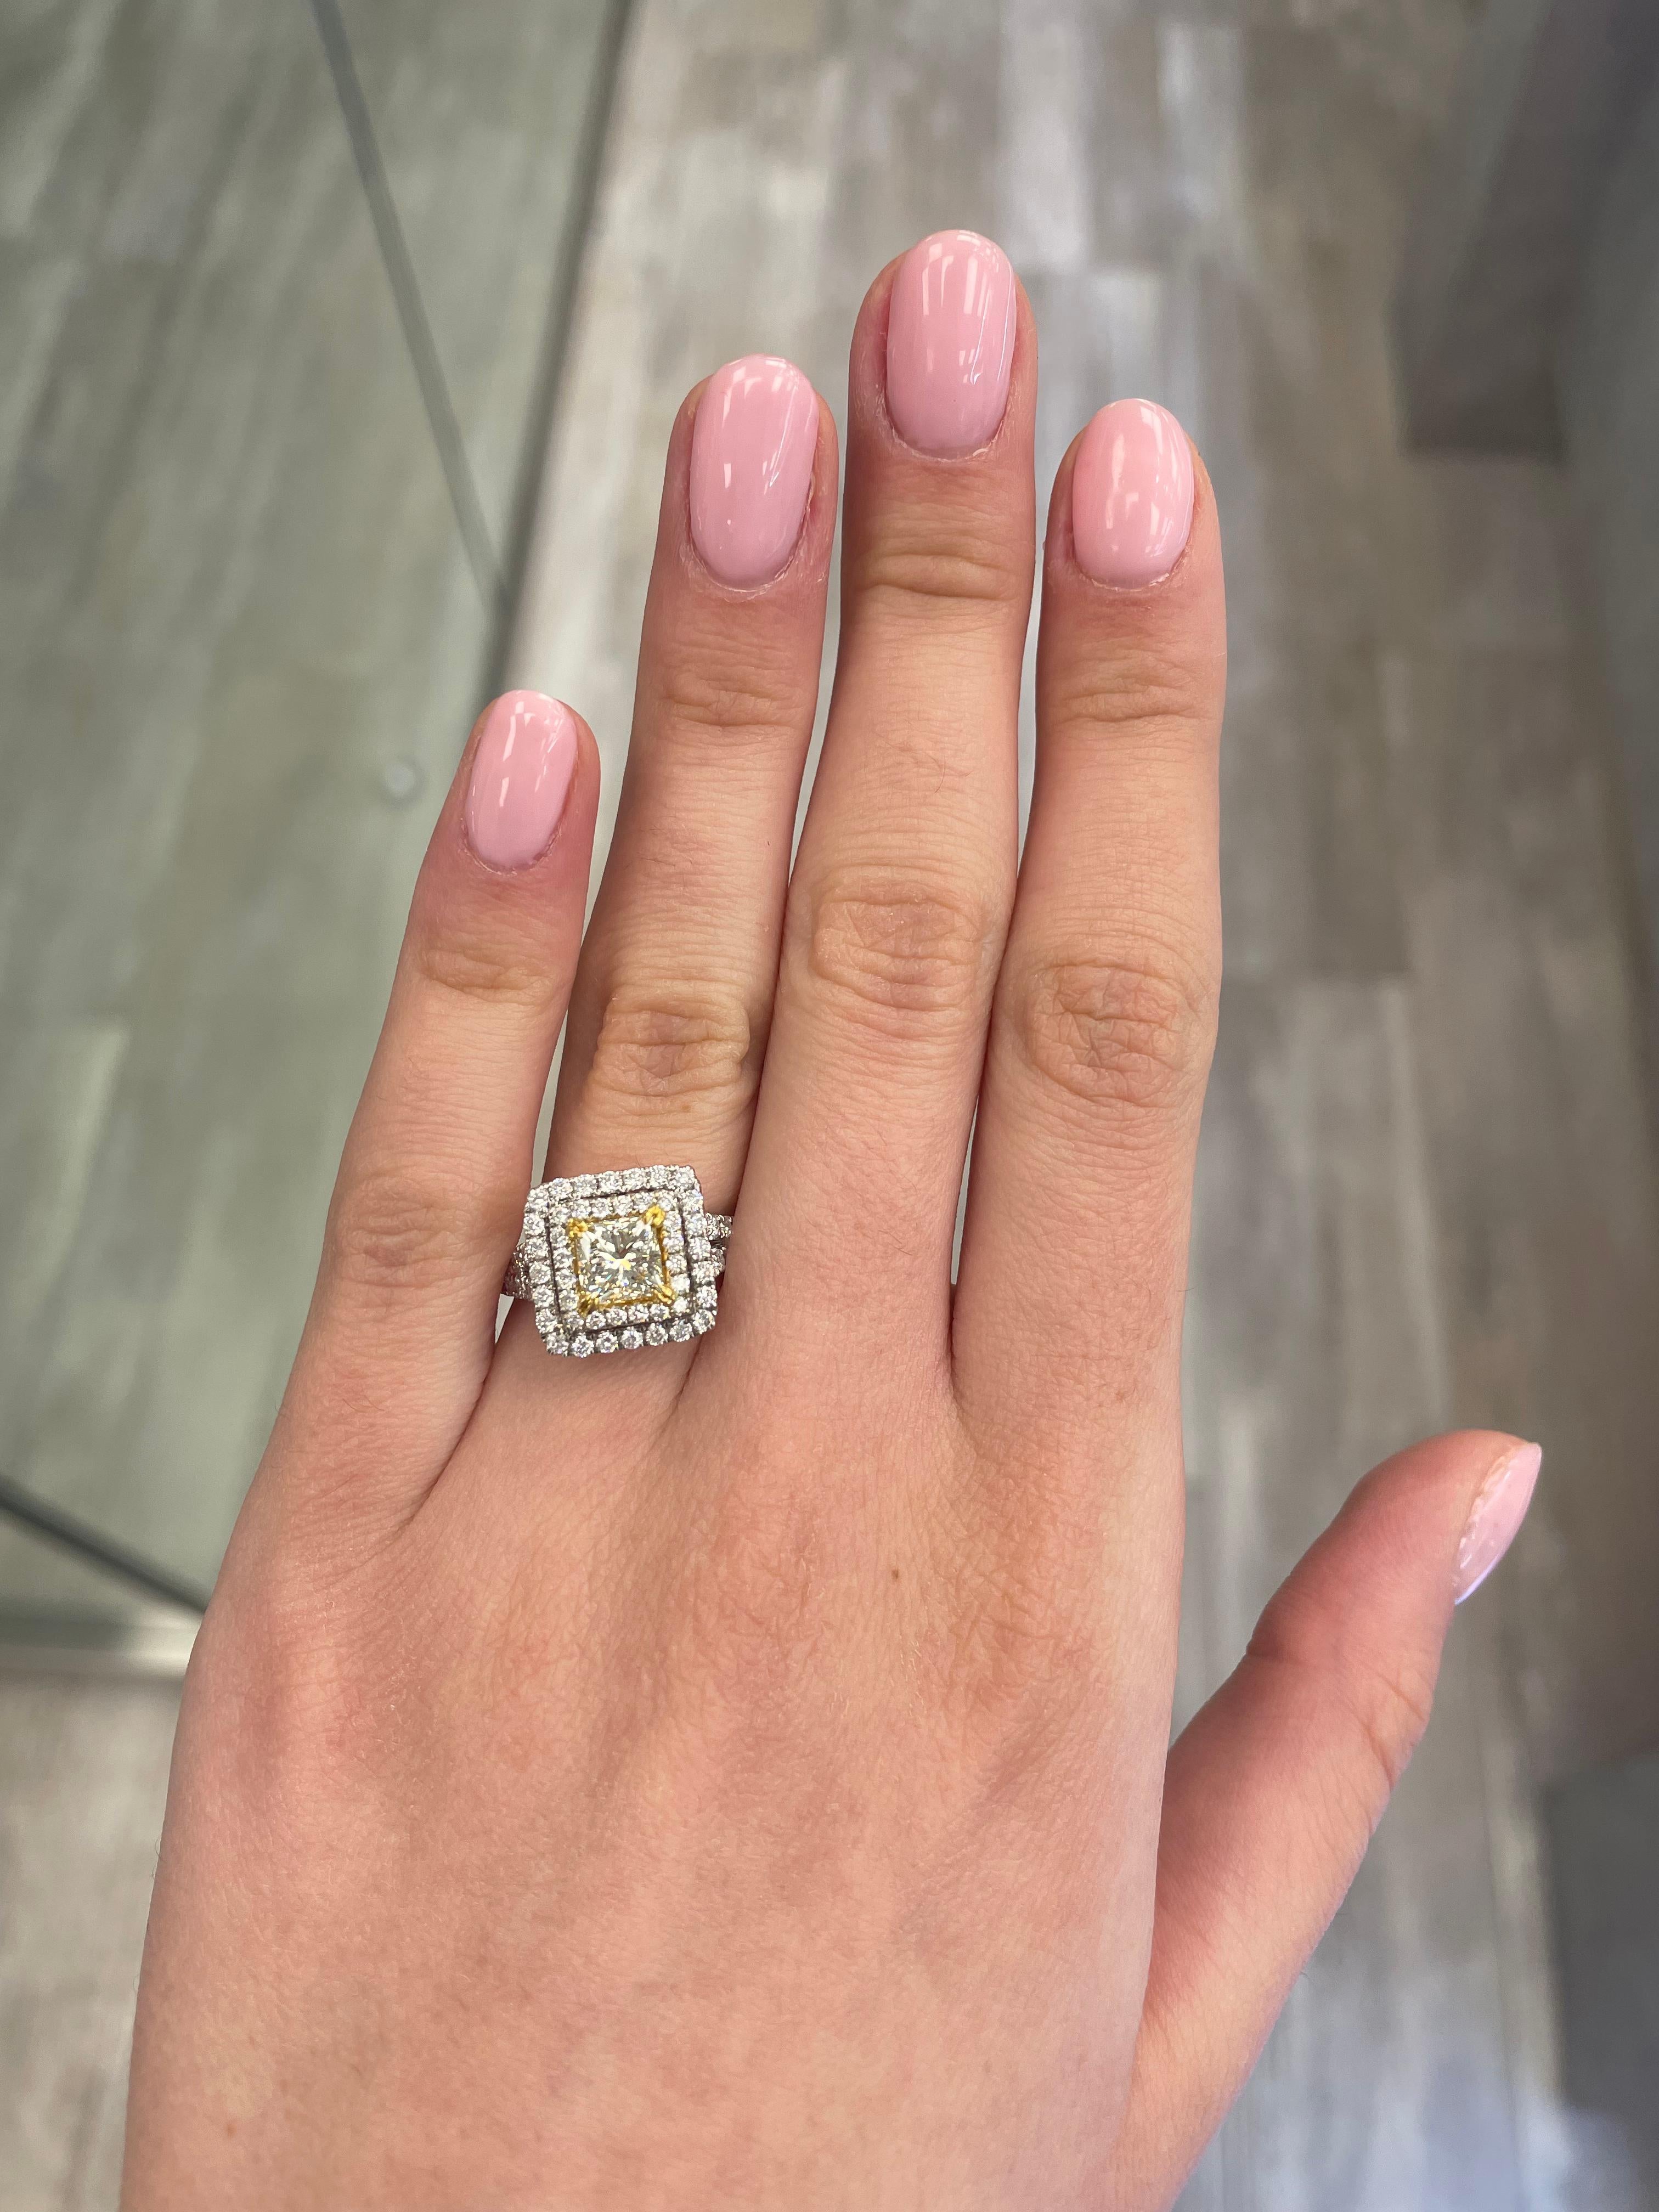 Stunning modern EGL certified yellow diamond double halo ring, two-tone 18k yellow and white gold, split shank. By Alexander Beverly Hills
2.26 carats total diamond weight.
1.53 carat princess cut Light Yellow color and VS1 clarity diamond, EGL